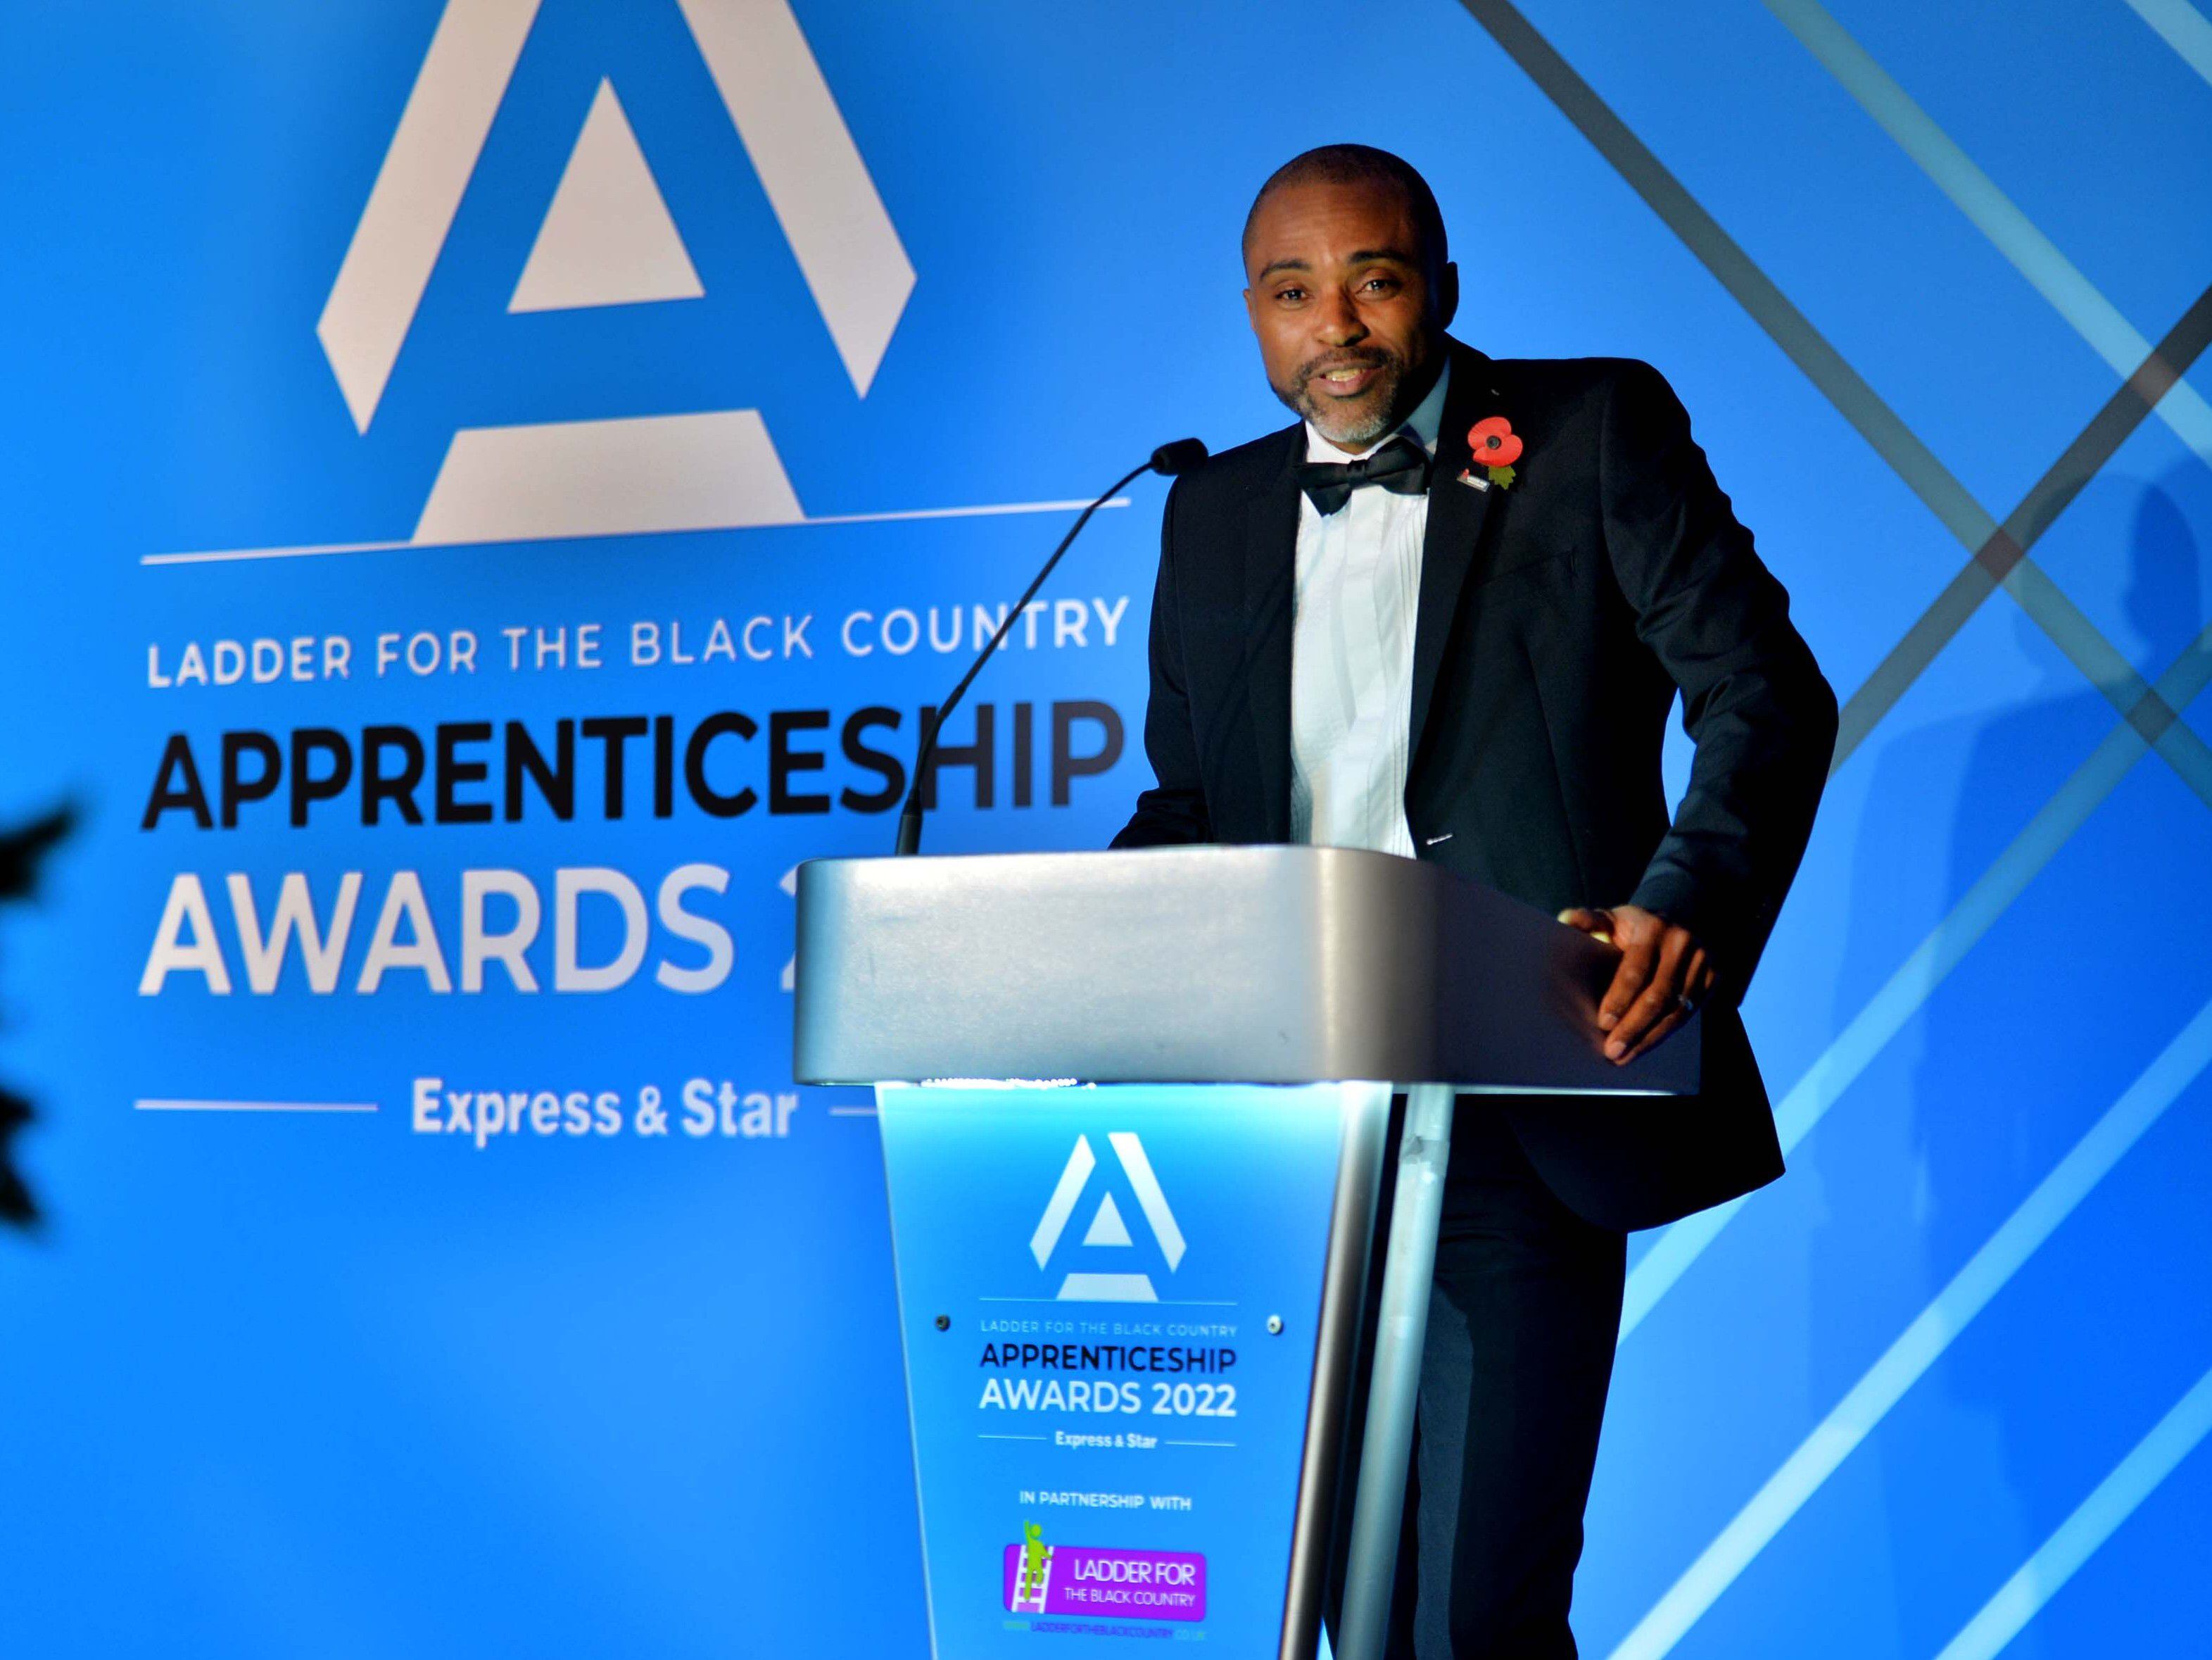 Fantastic achievements of apprentices highlighted in inaugural awards